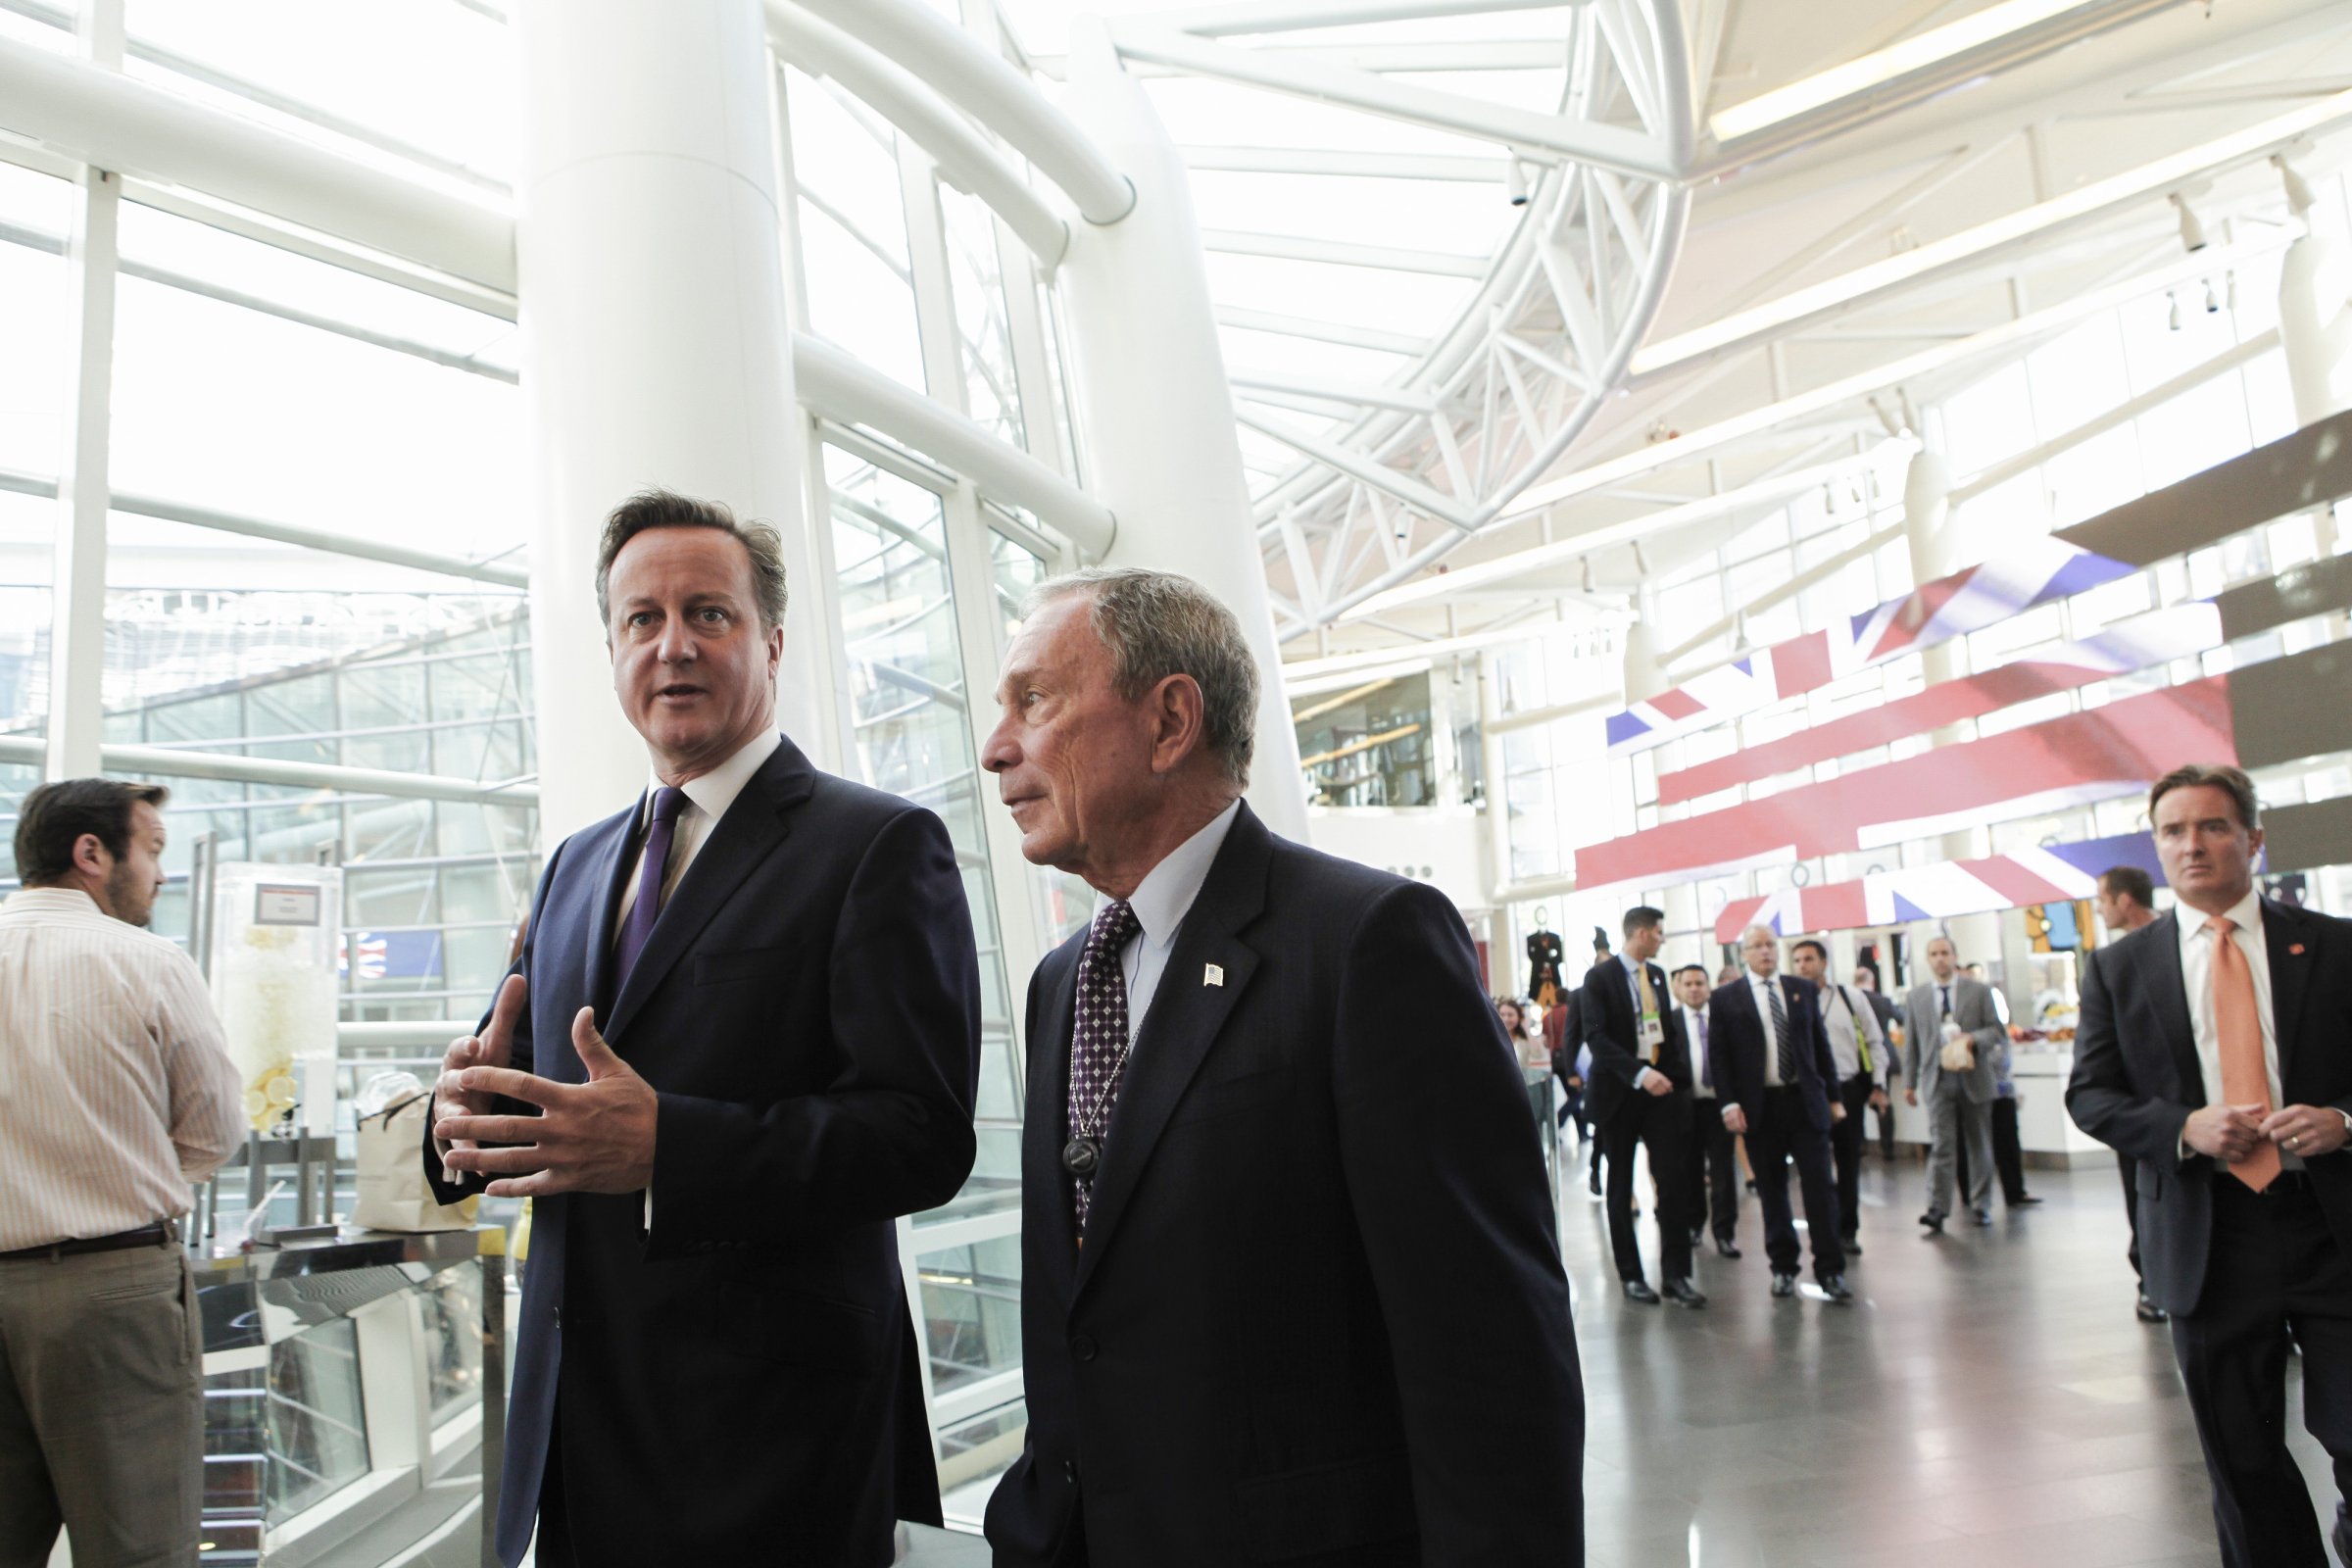 David Cameron Attends CEO Roundtable At Bloomberg LP Headquarters